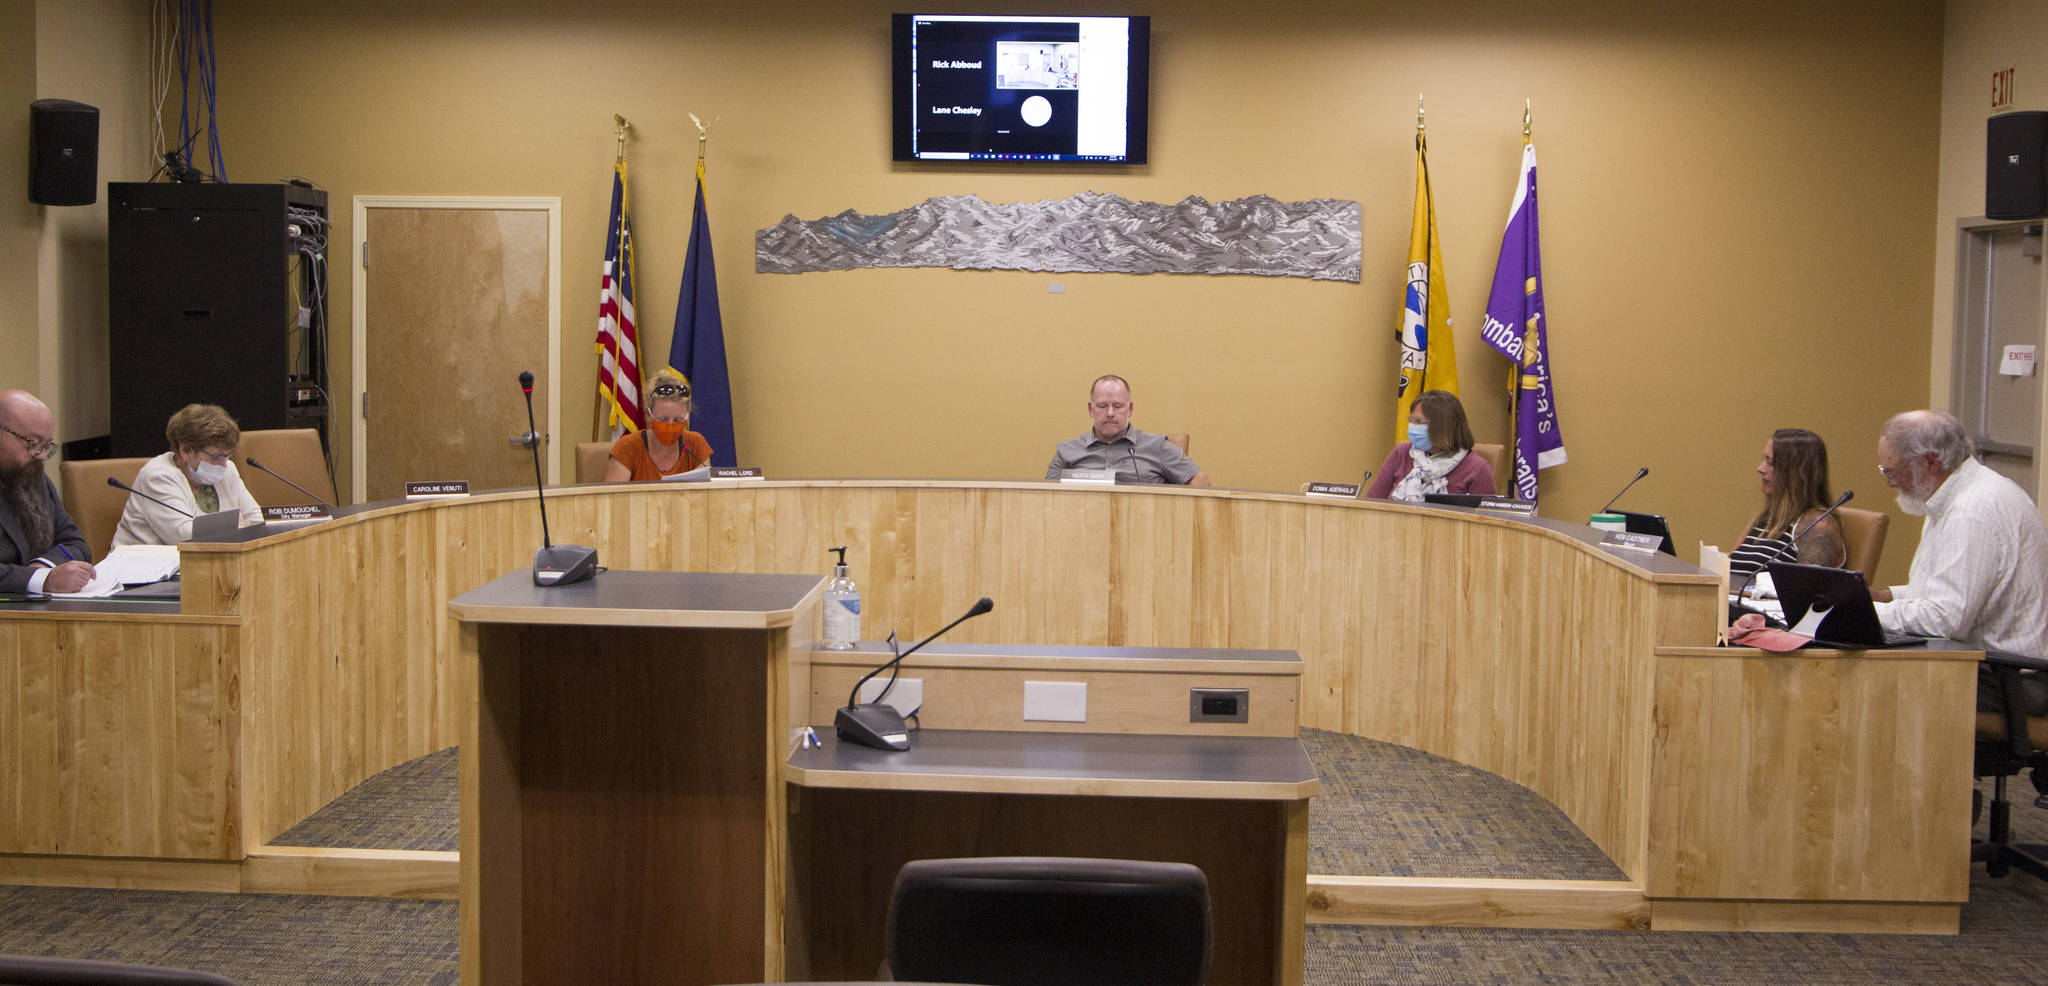 The Homer City Council met in person for the first time in the newly renovated Cowles Council Chamber on July 26.